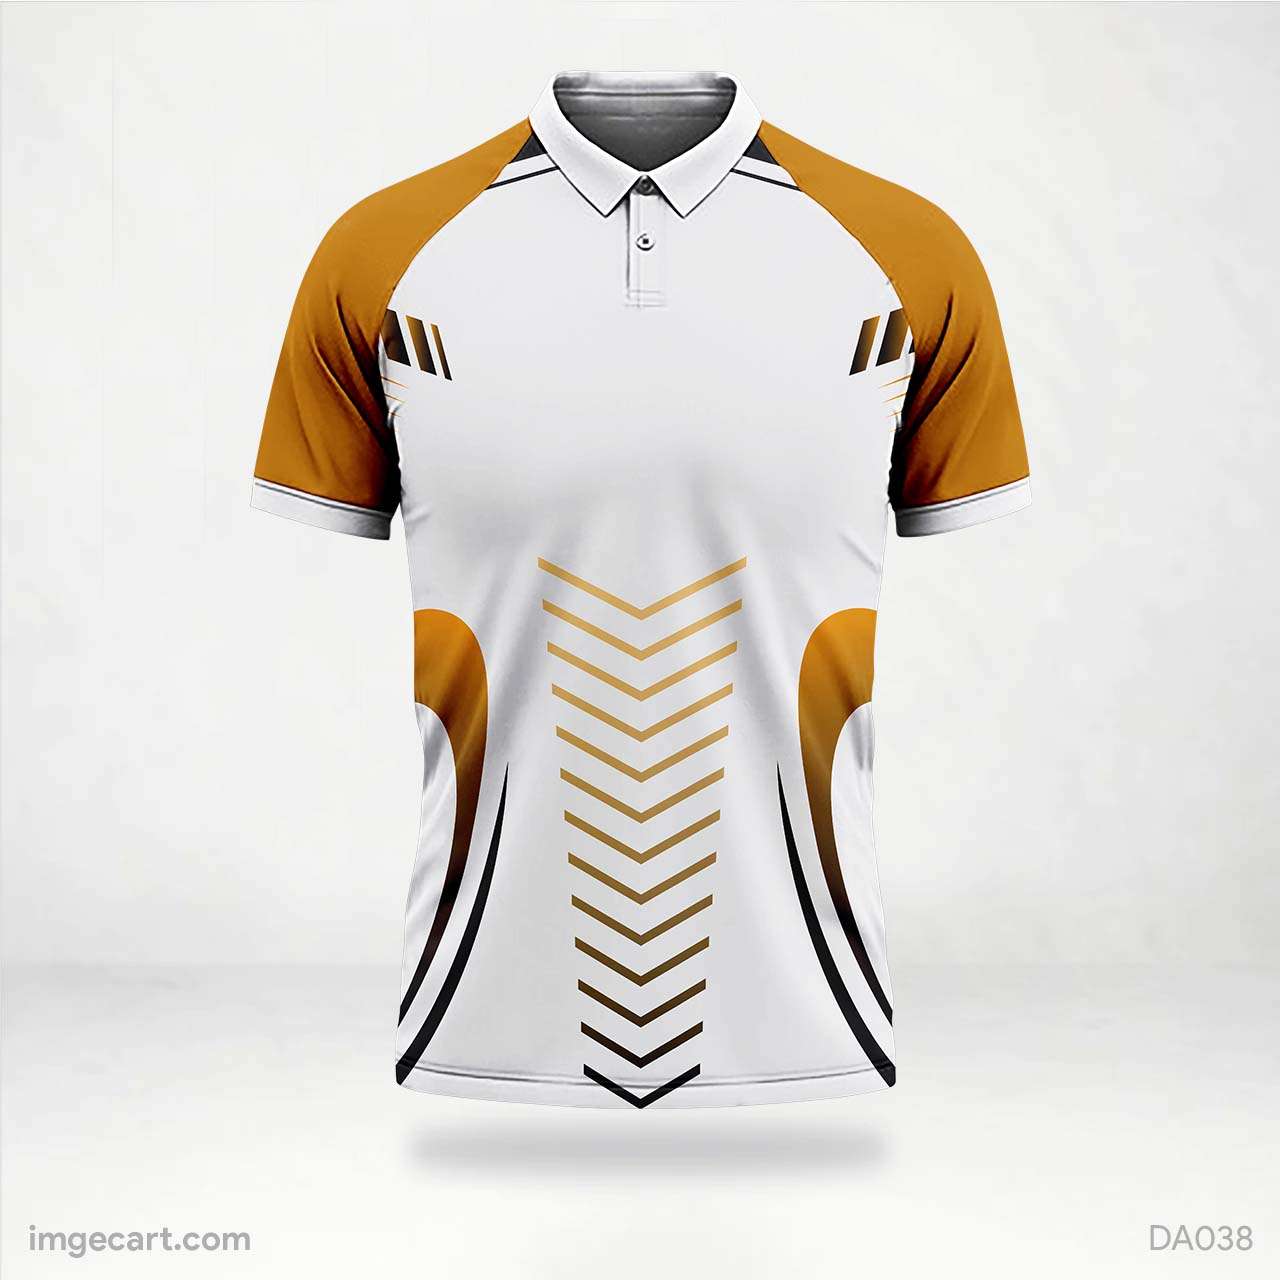 Cricket Jersey design White and Gold Pattern - imgecart